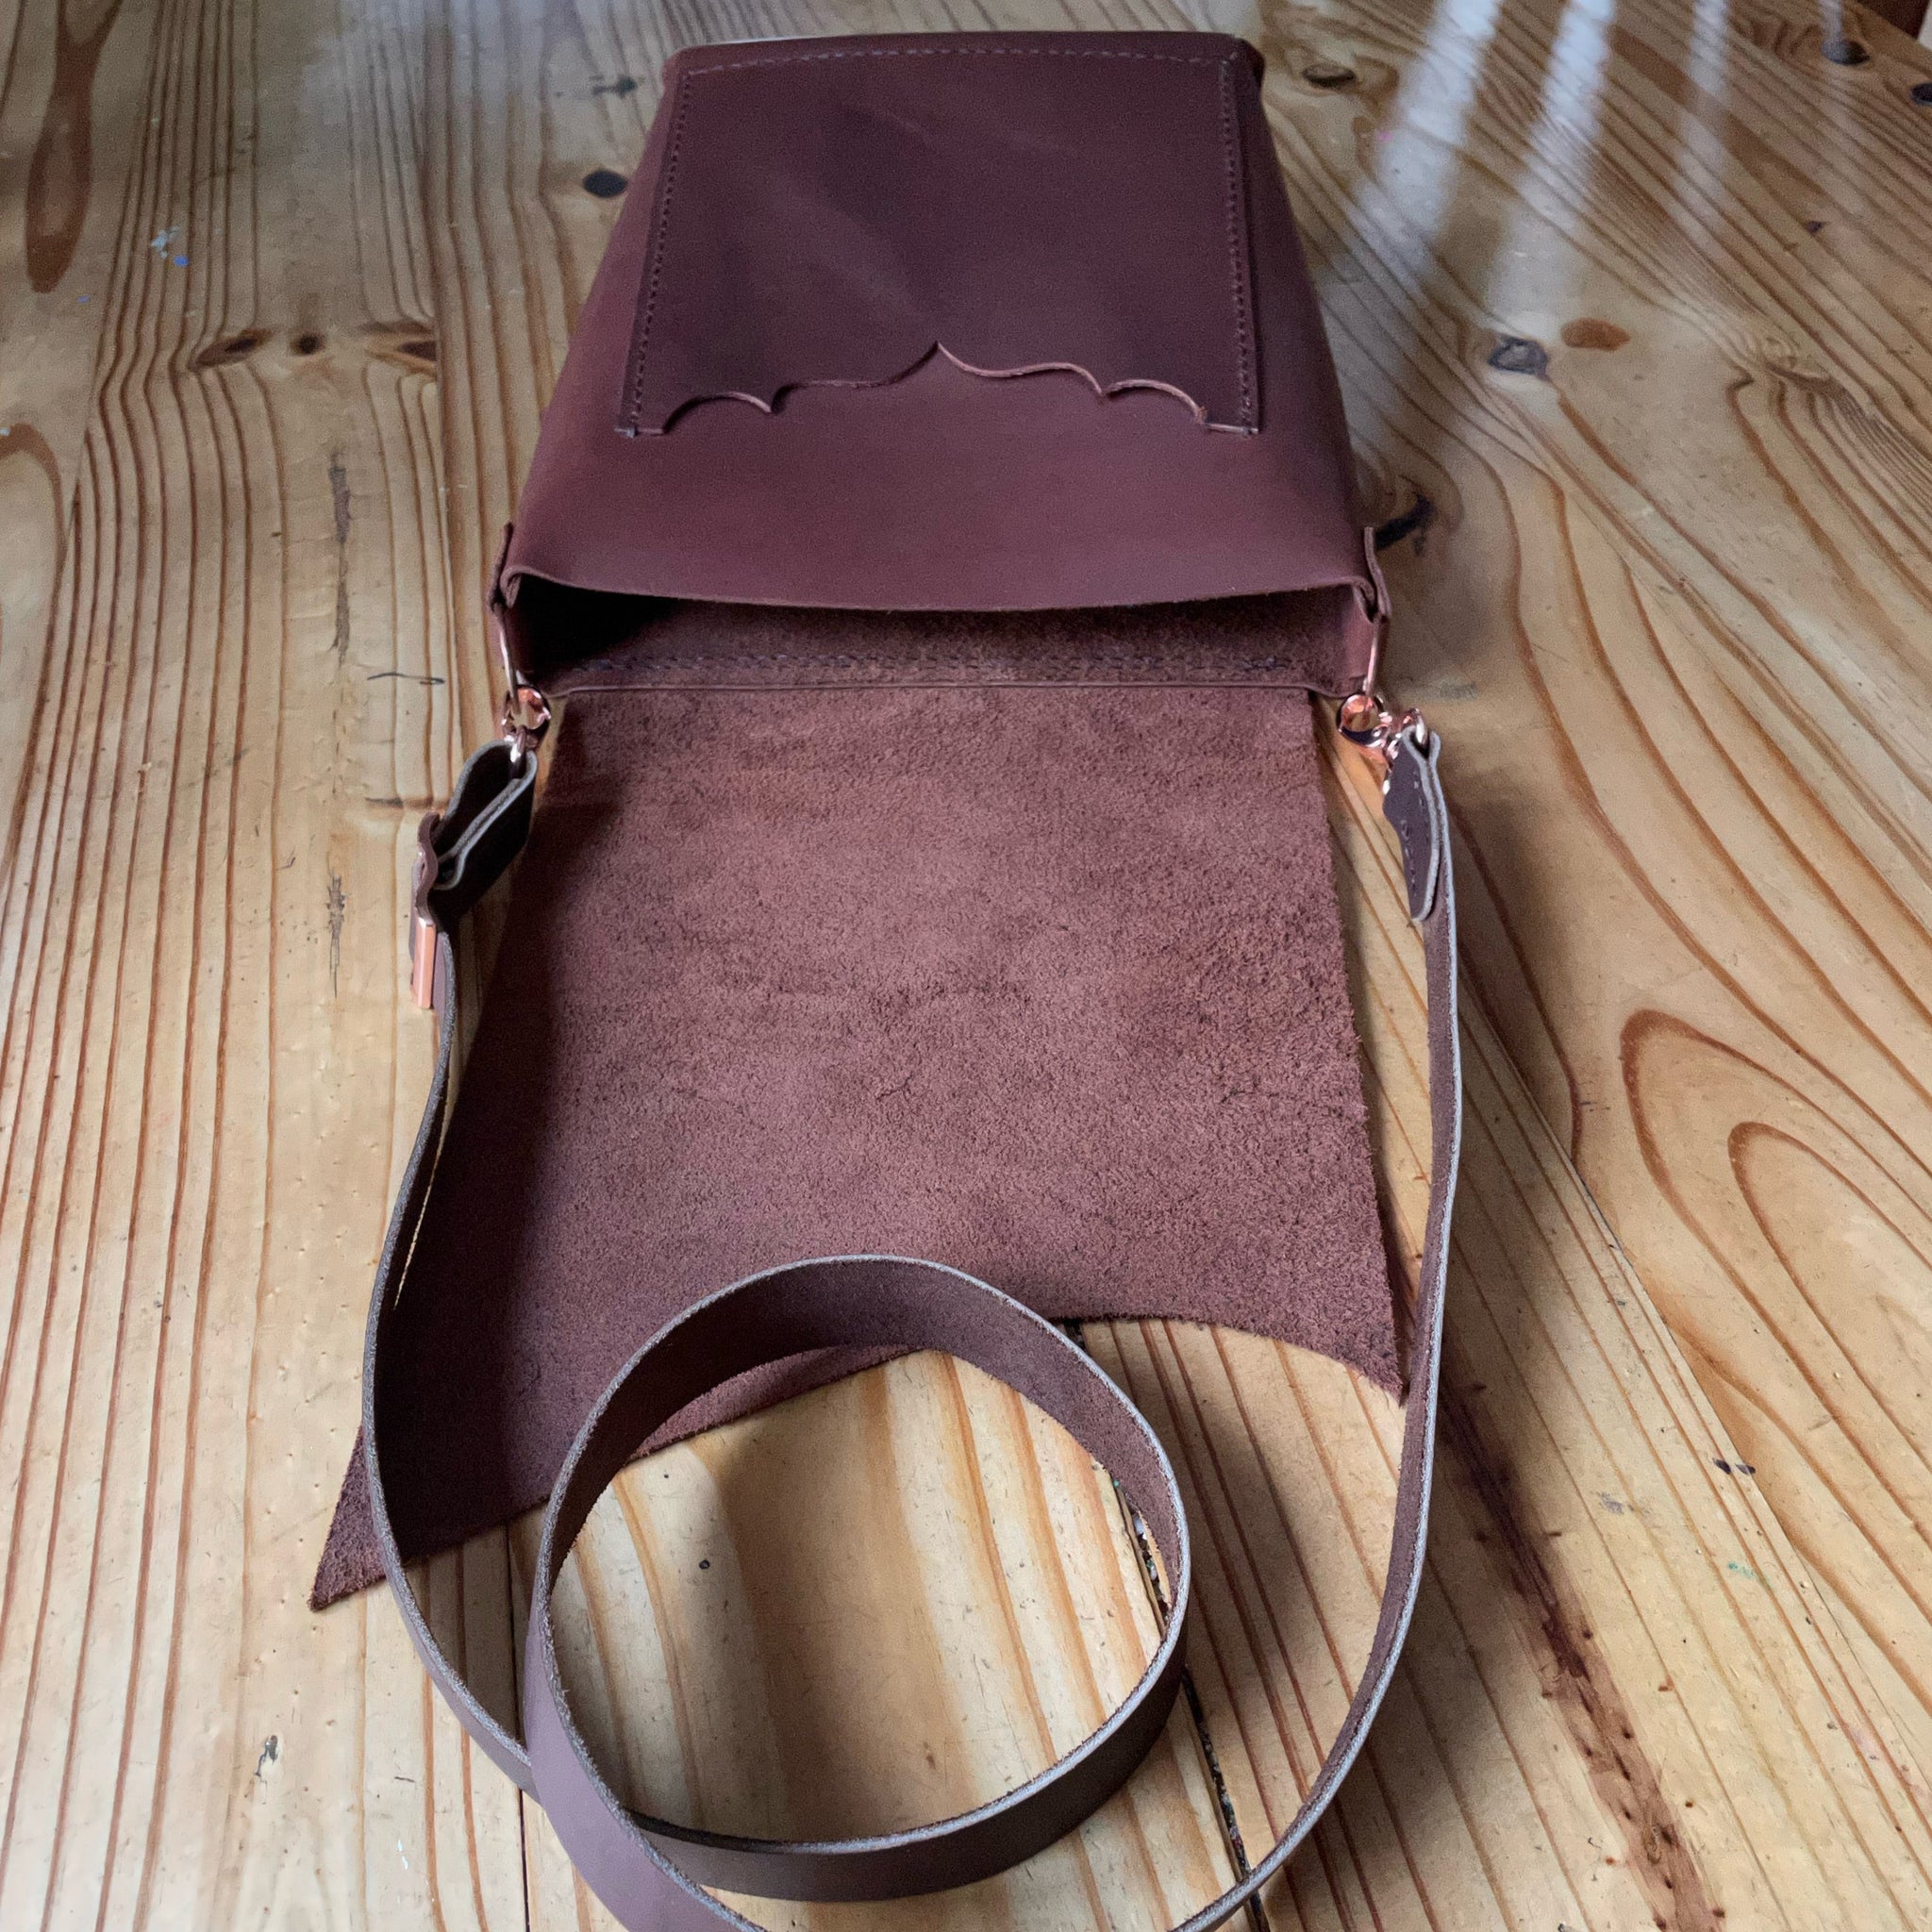 Handmade Leather Coin Pouch - Grommet's Leathercraft